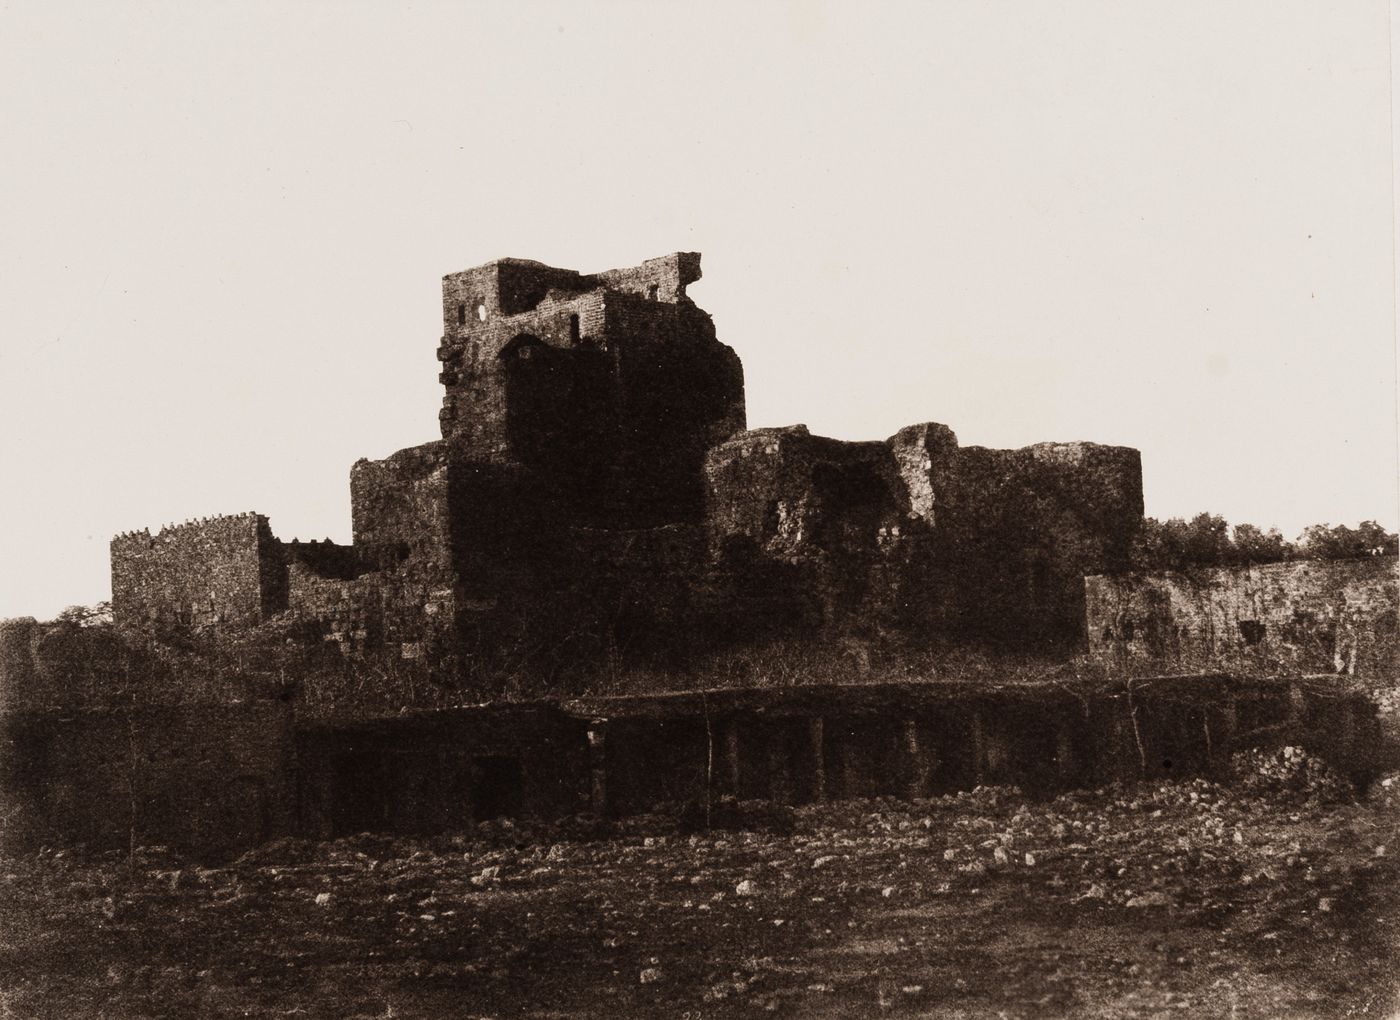 View of the ruins of a castle, Jubayl, Ottoman Empire (now in Lebanon)